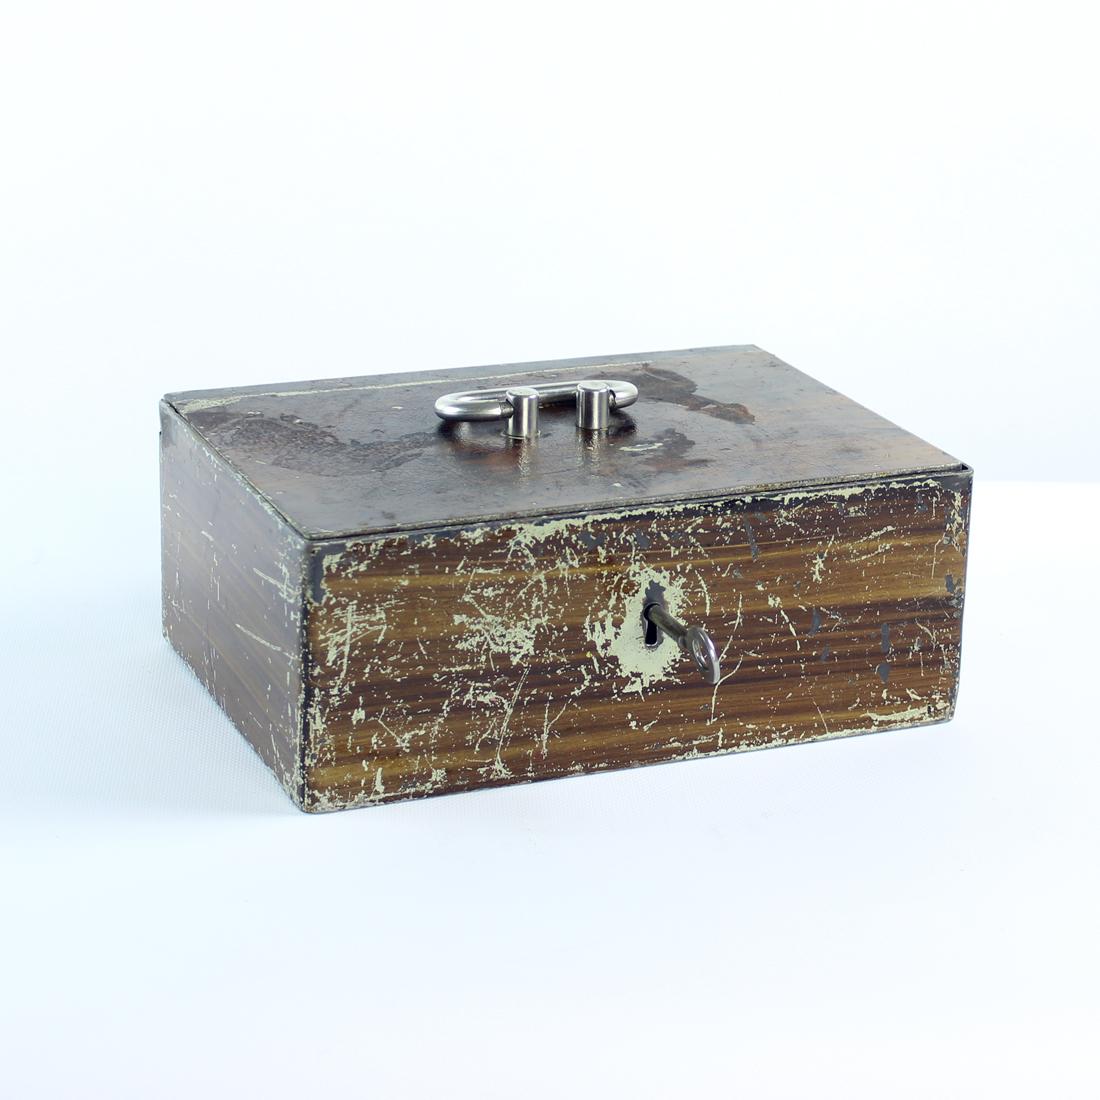 Beautiful vintage safe-deposit box in a great functional condition. The box was created in 1930s in Czechoslovakia and works like brand new. Original key. The box is in vintage finish with scratches and wear on the top color which looks very vintage